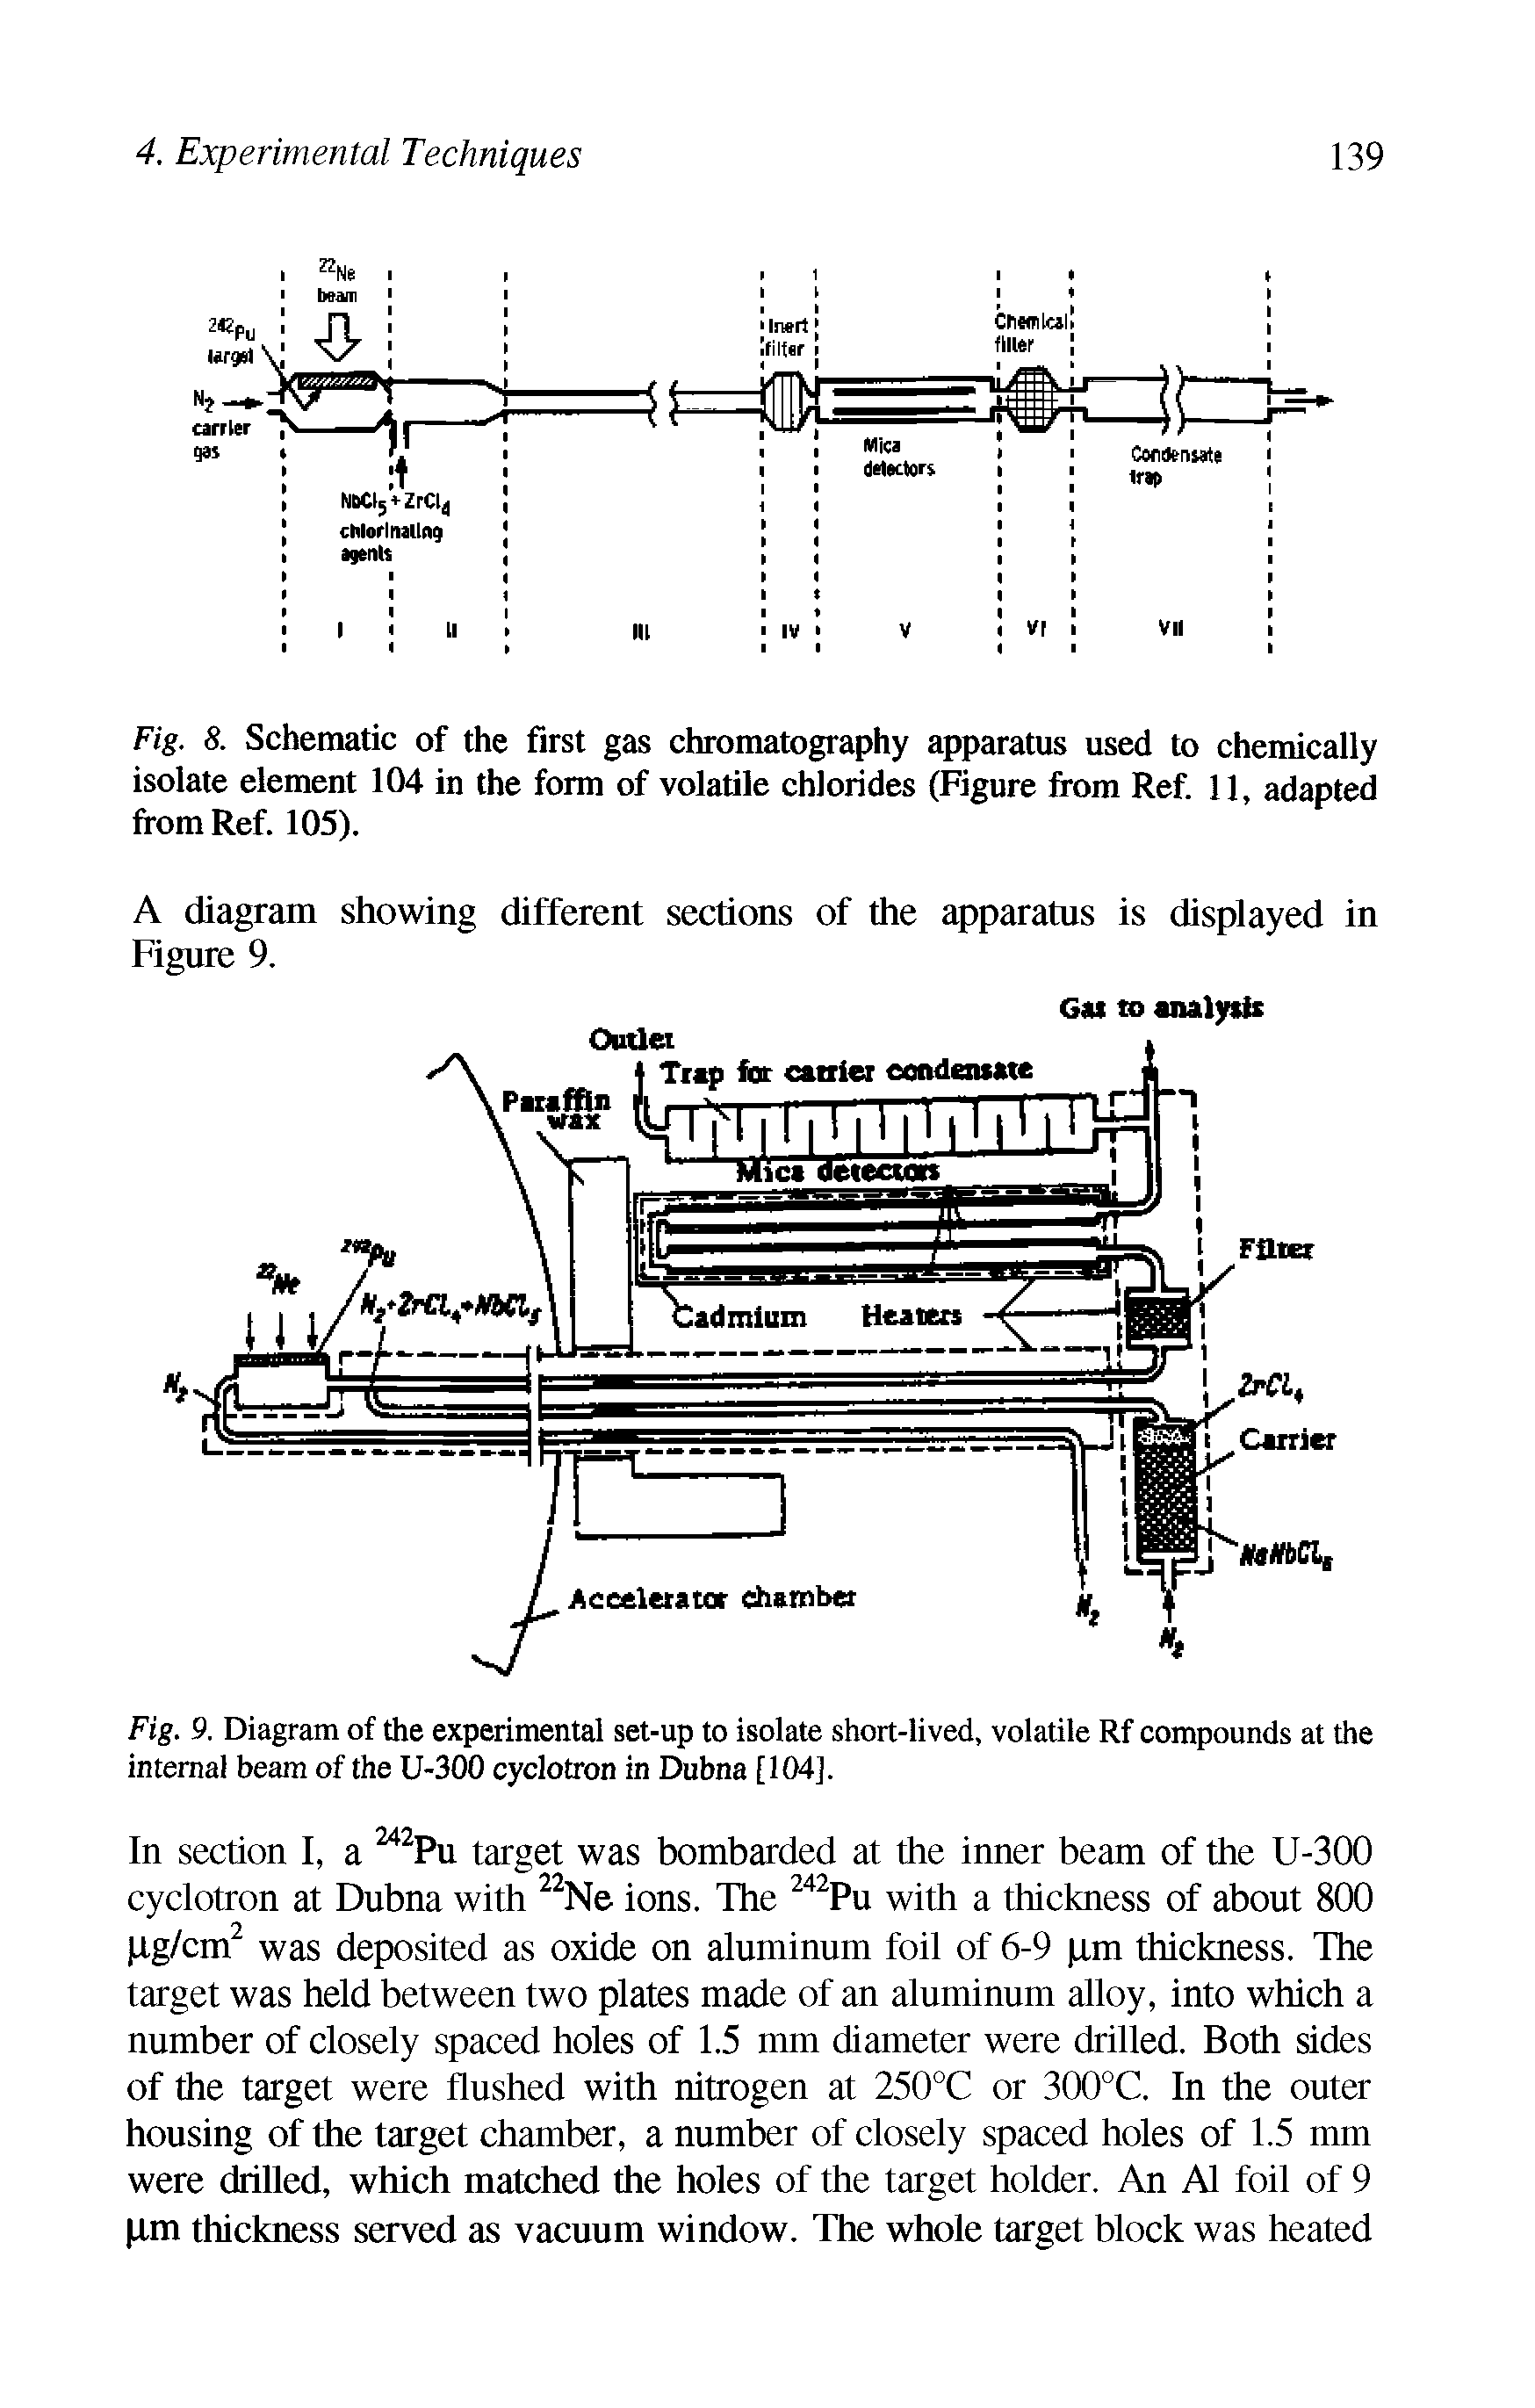 Fig. 8. Schematic of the first gas chromatography apparatus used to chemically isolate element 104 in the form of volatile chlorides (Figure from Ref. 11, adapted from Ref. 105).